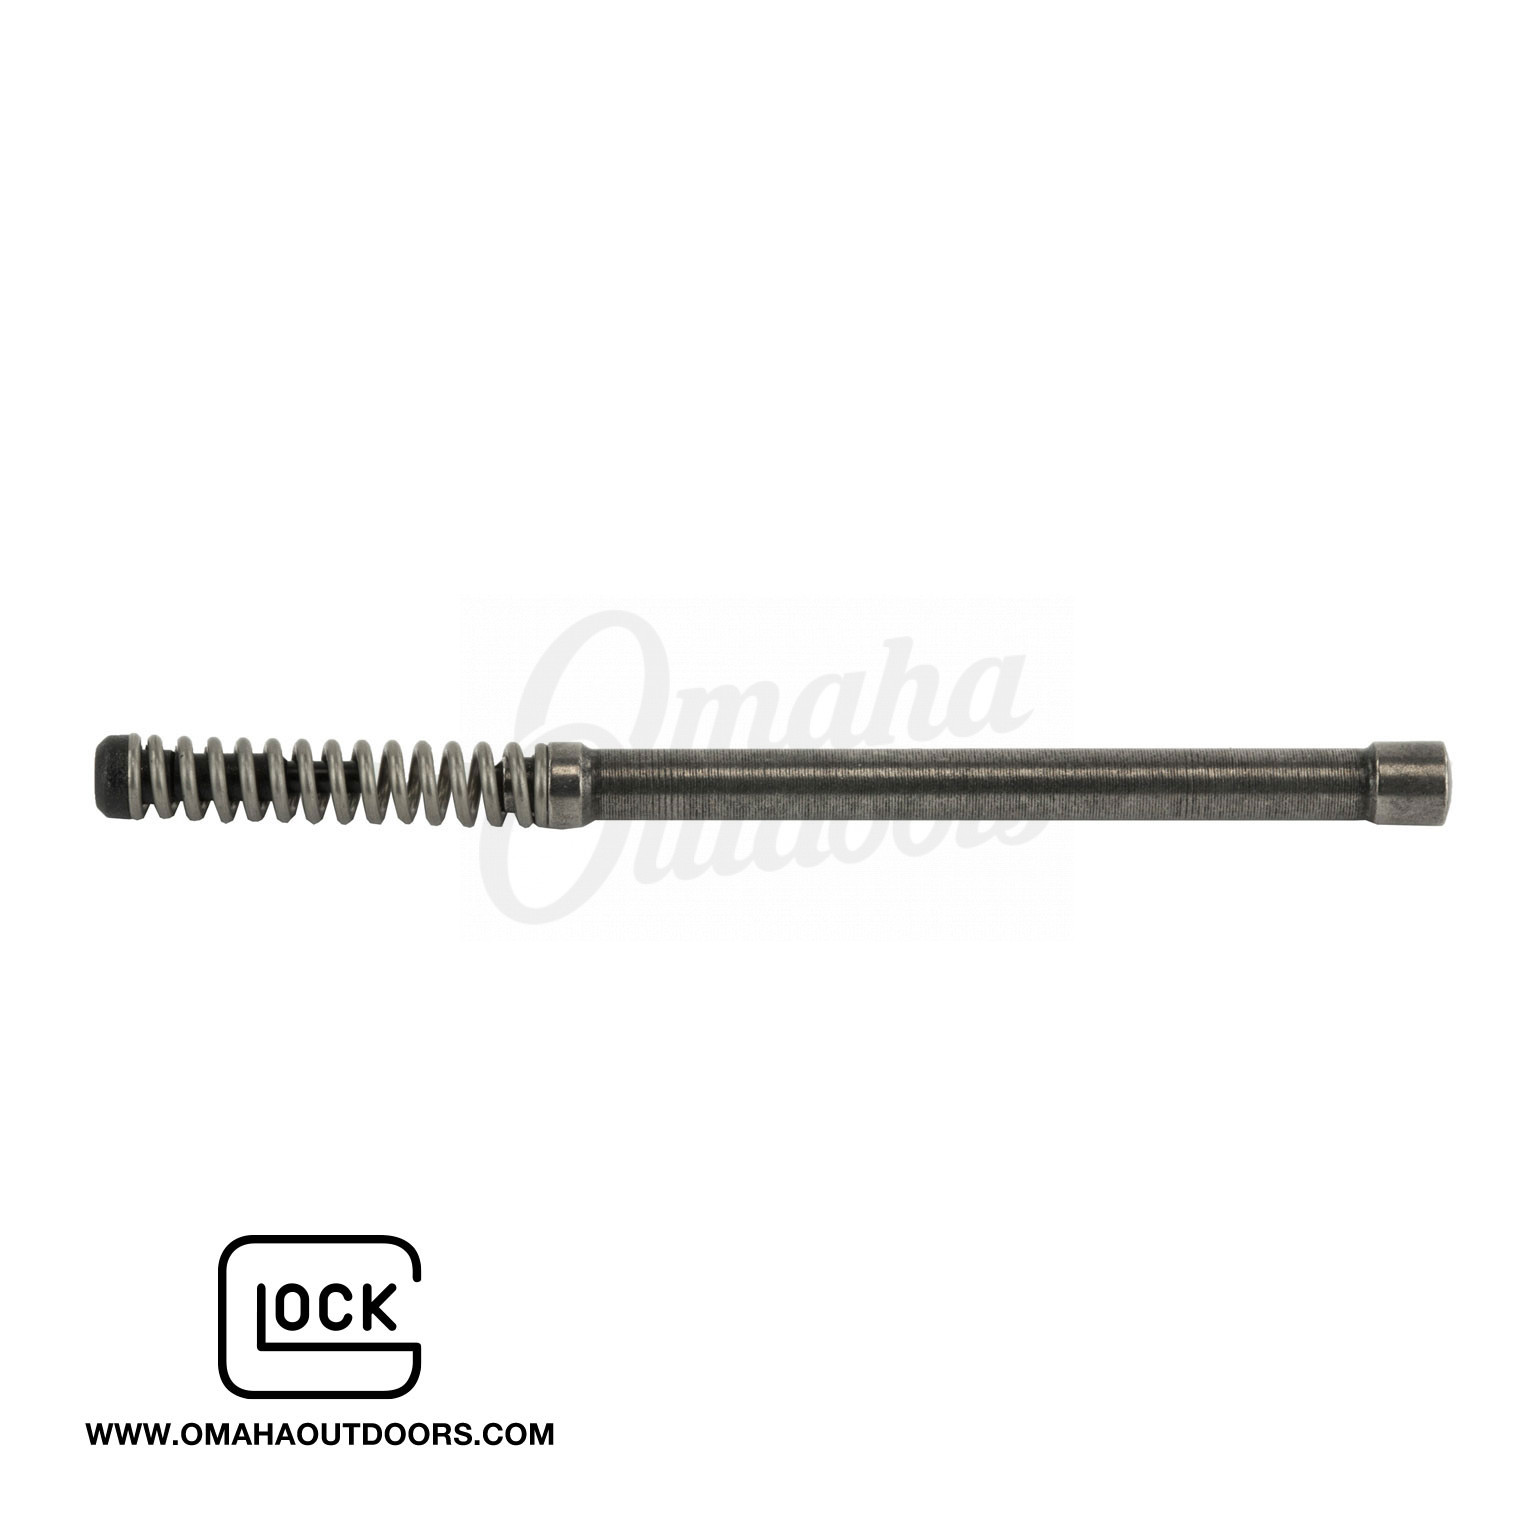 SP03449 OEM Glock Extractor Assembly with Spring For Gen 5 Glock 17/19 